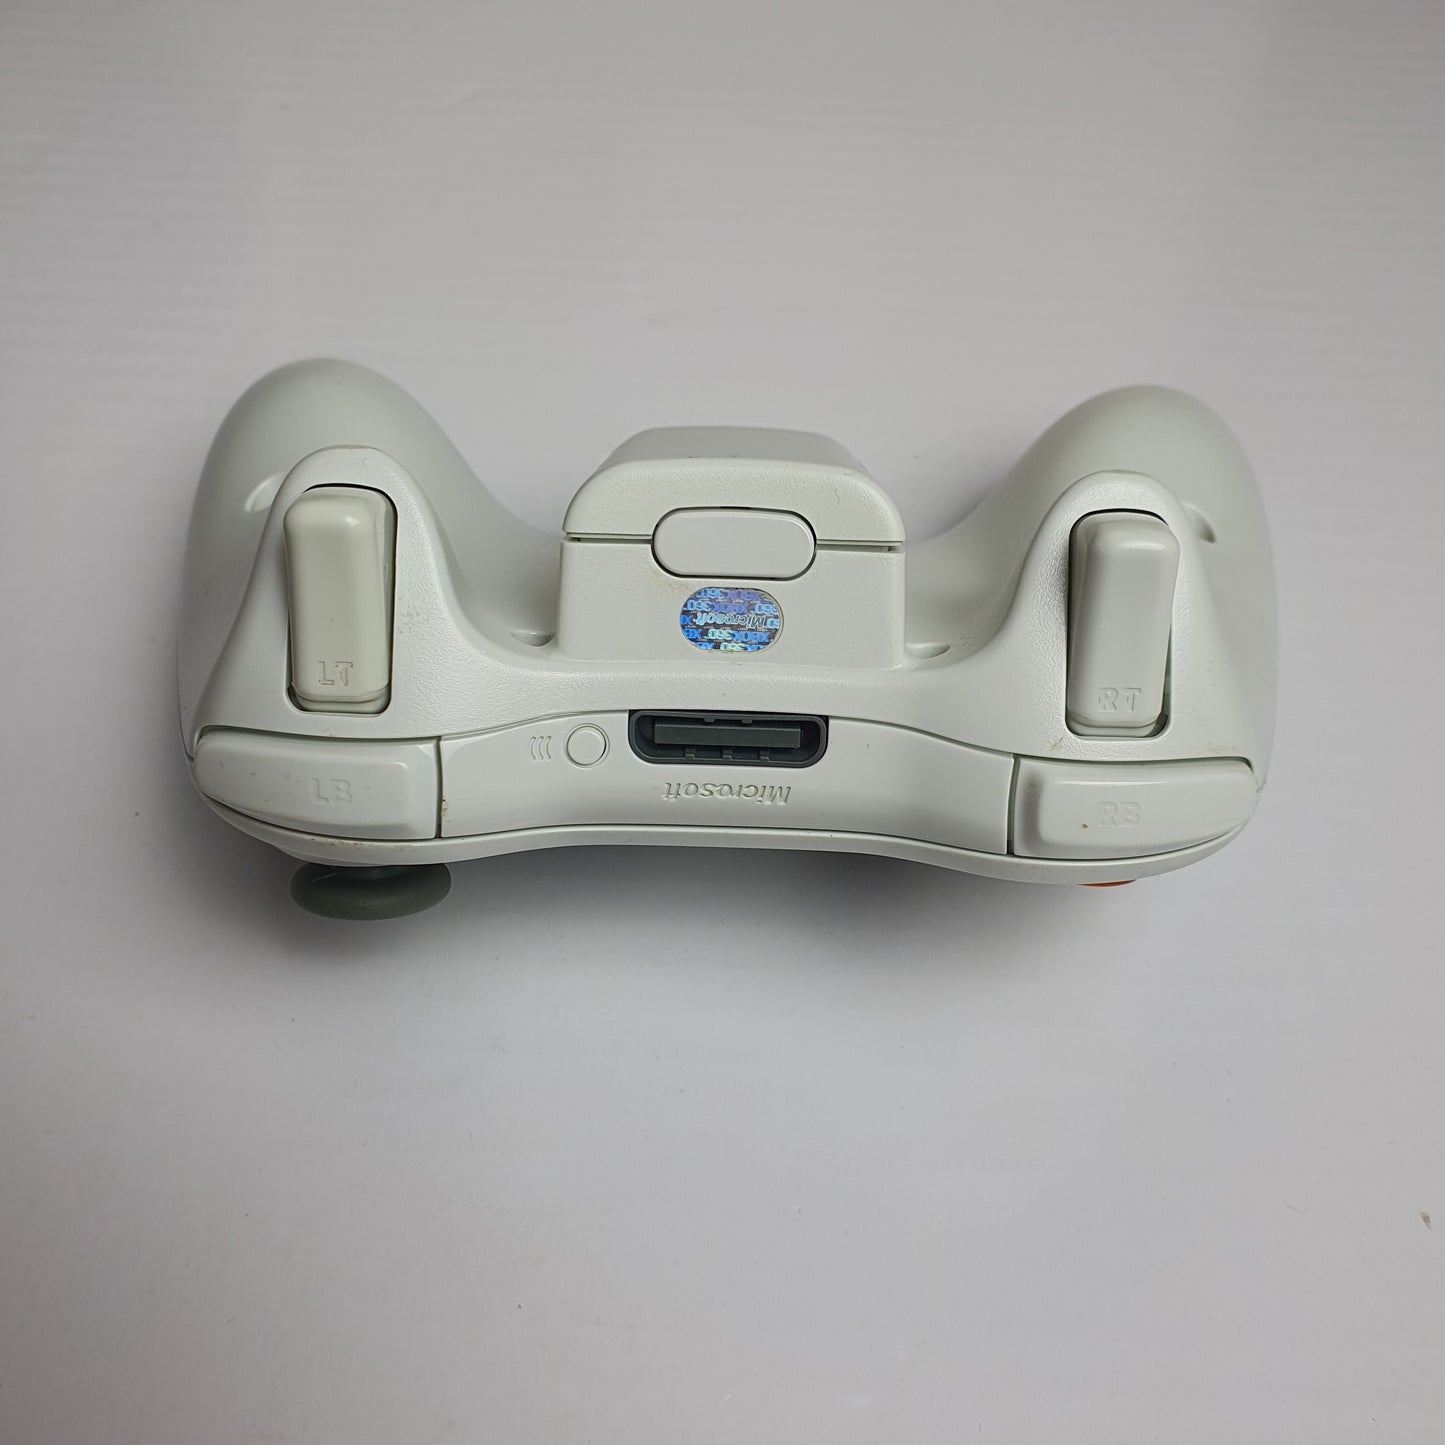 Official Microsoft Xbox 360 Wireless White Controller